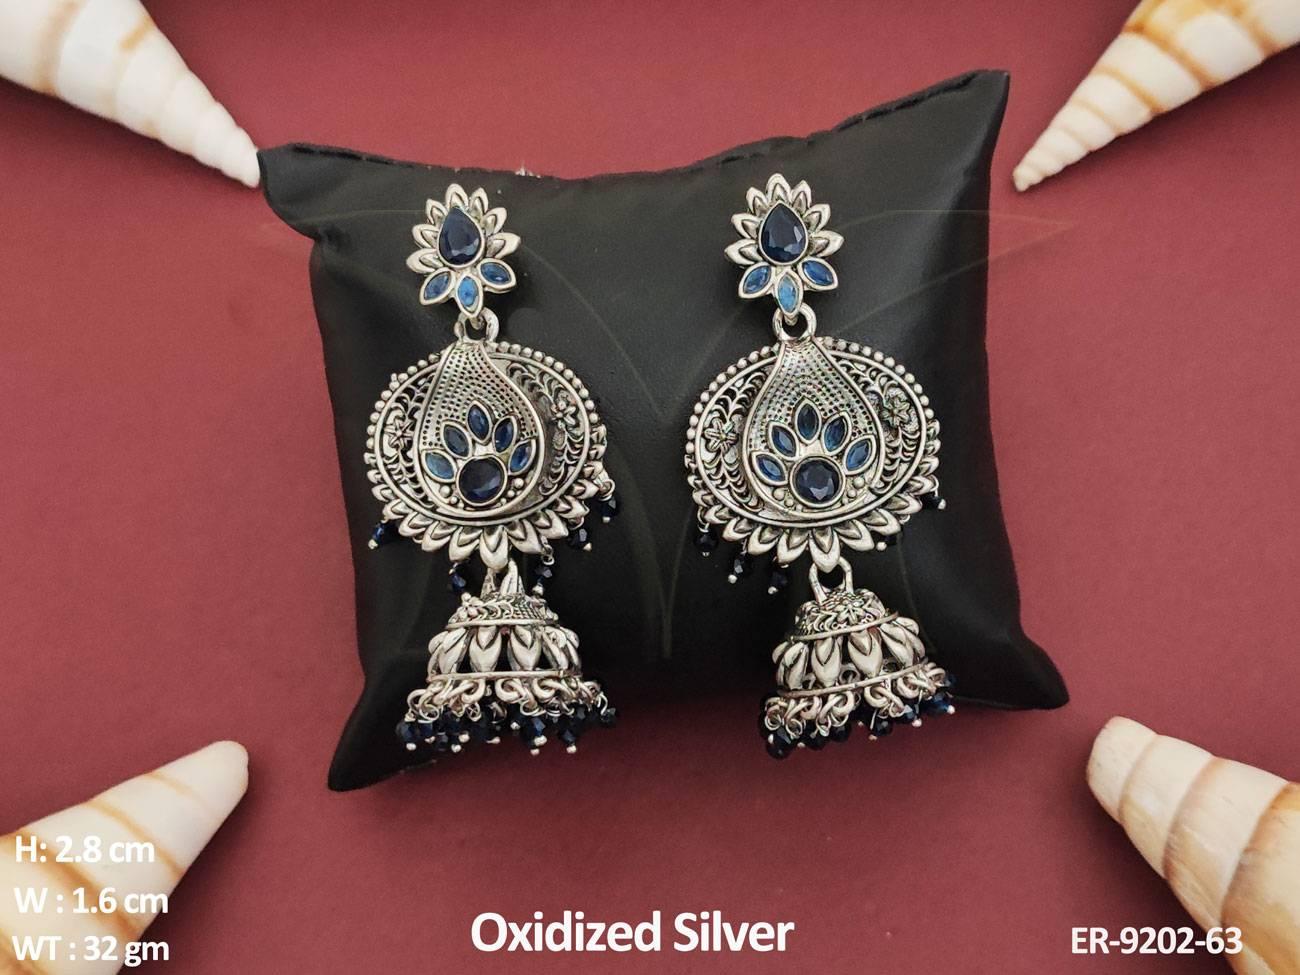 Made with high-quality materials and a unique oxidised silver finish, these earrings are both stylish and durable.